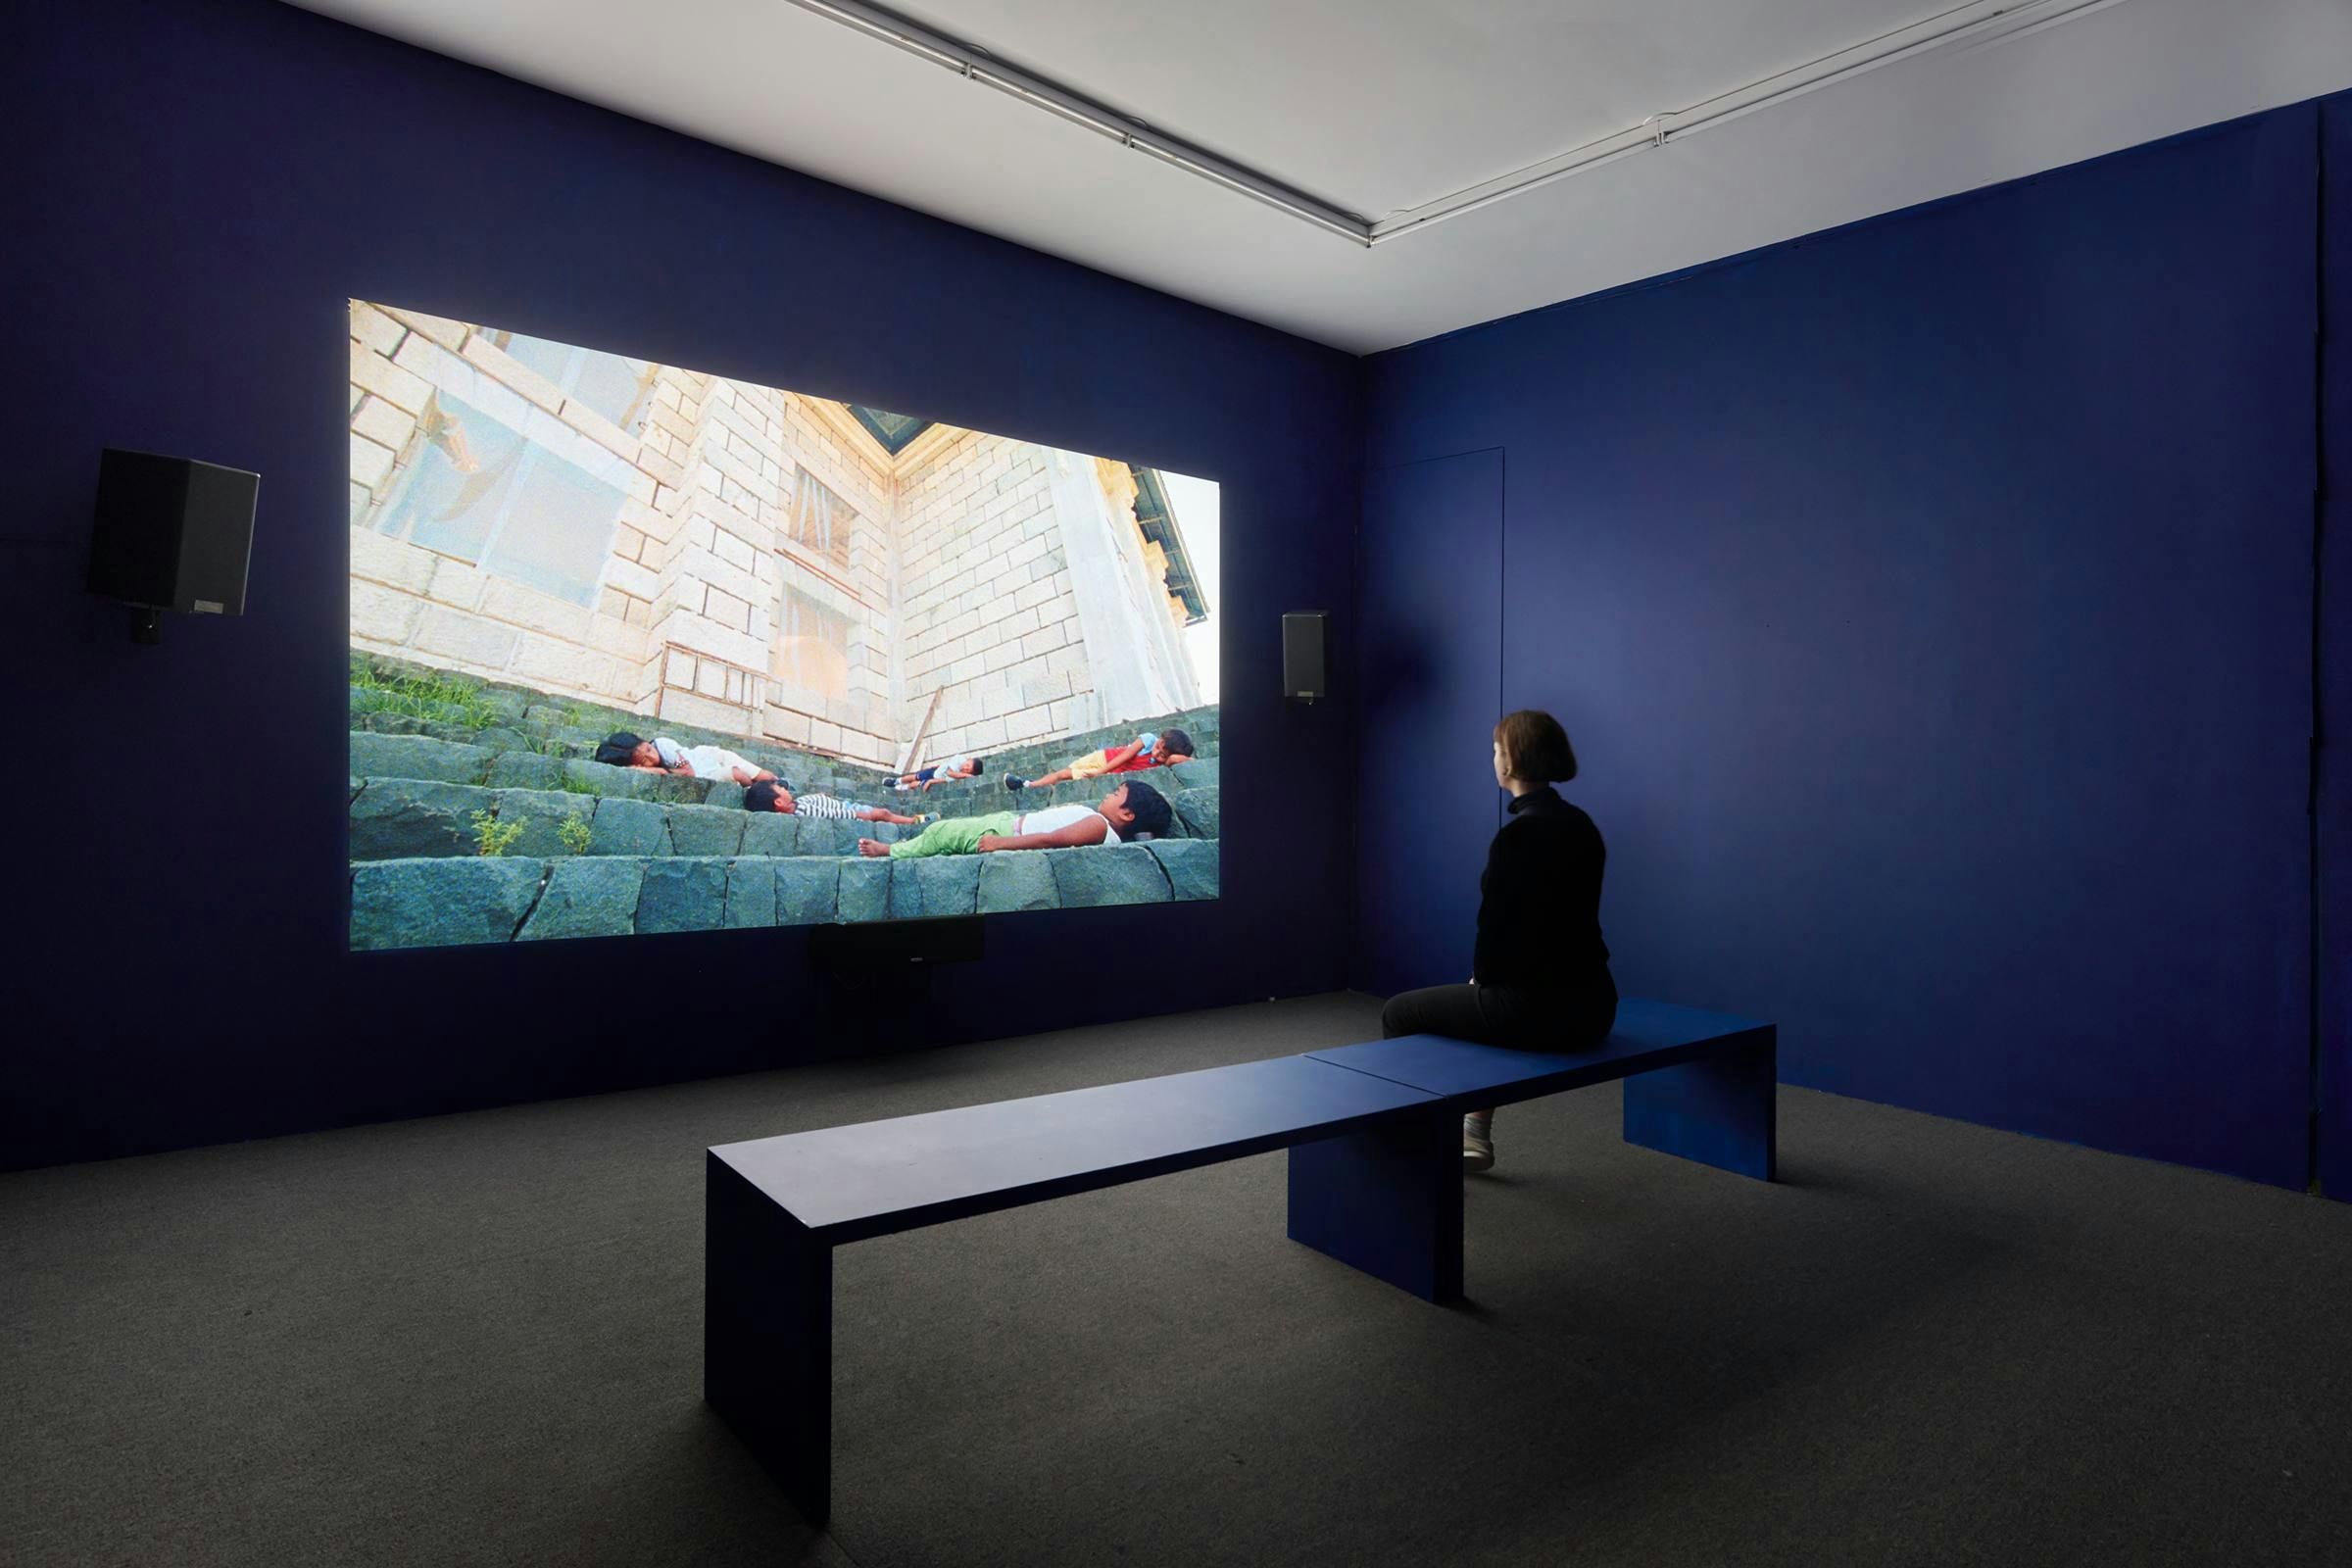 An art work projected in an gallery space. The walls are blue and there is a blue bench in front of the work which a person is sitting on.